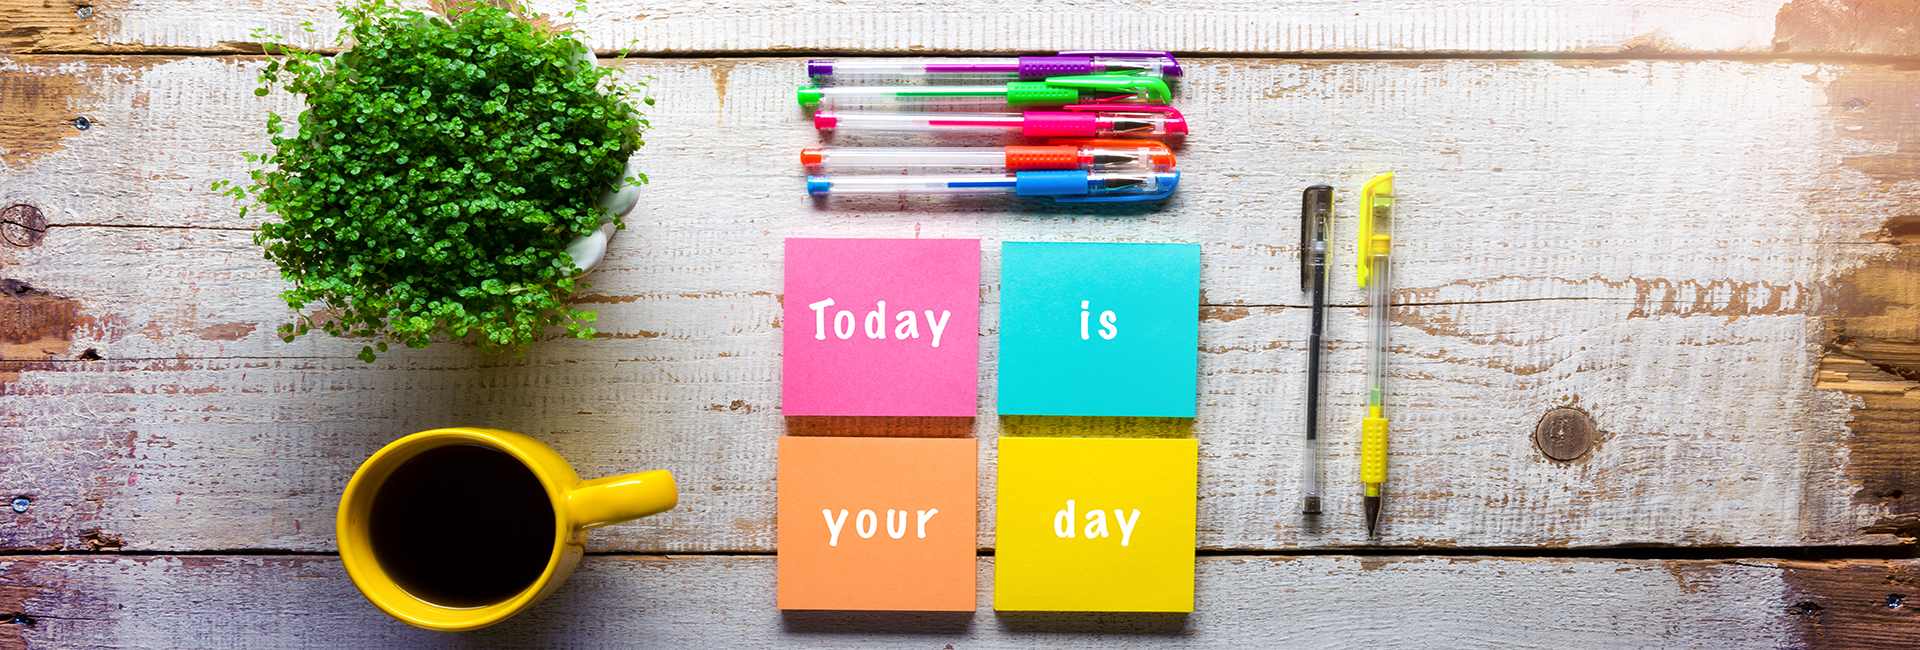 Today is your day stock photo